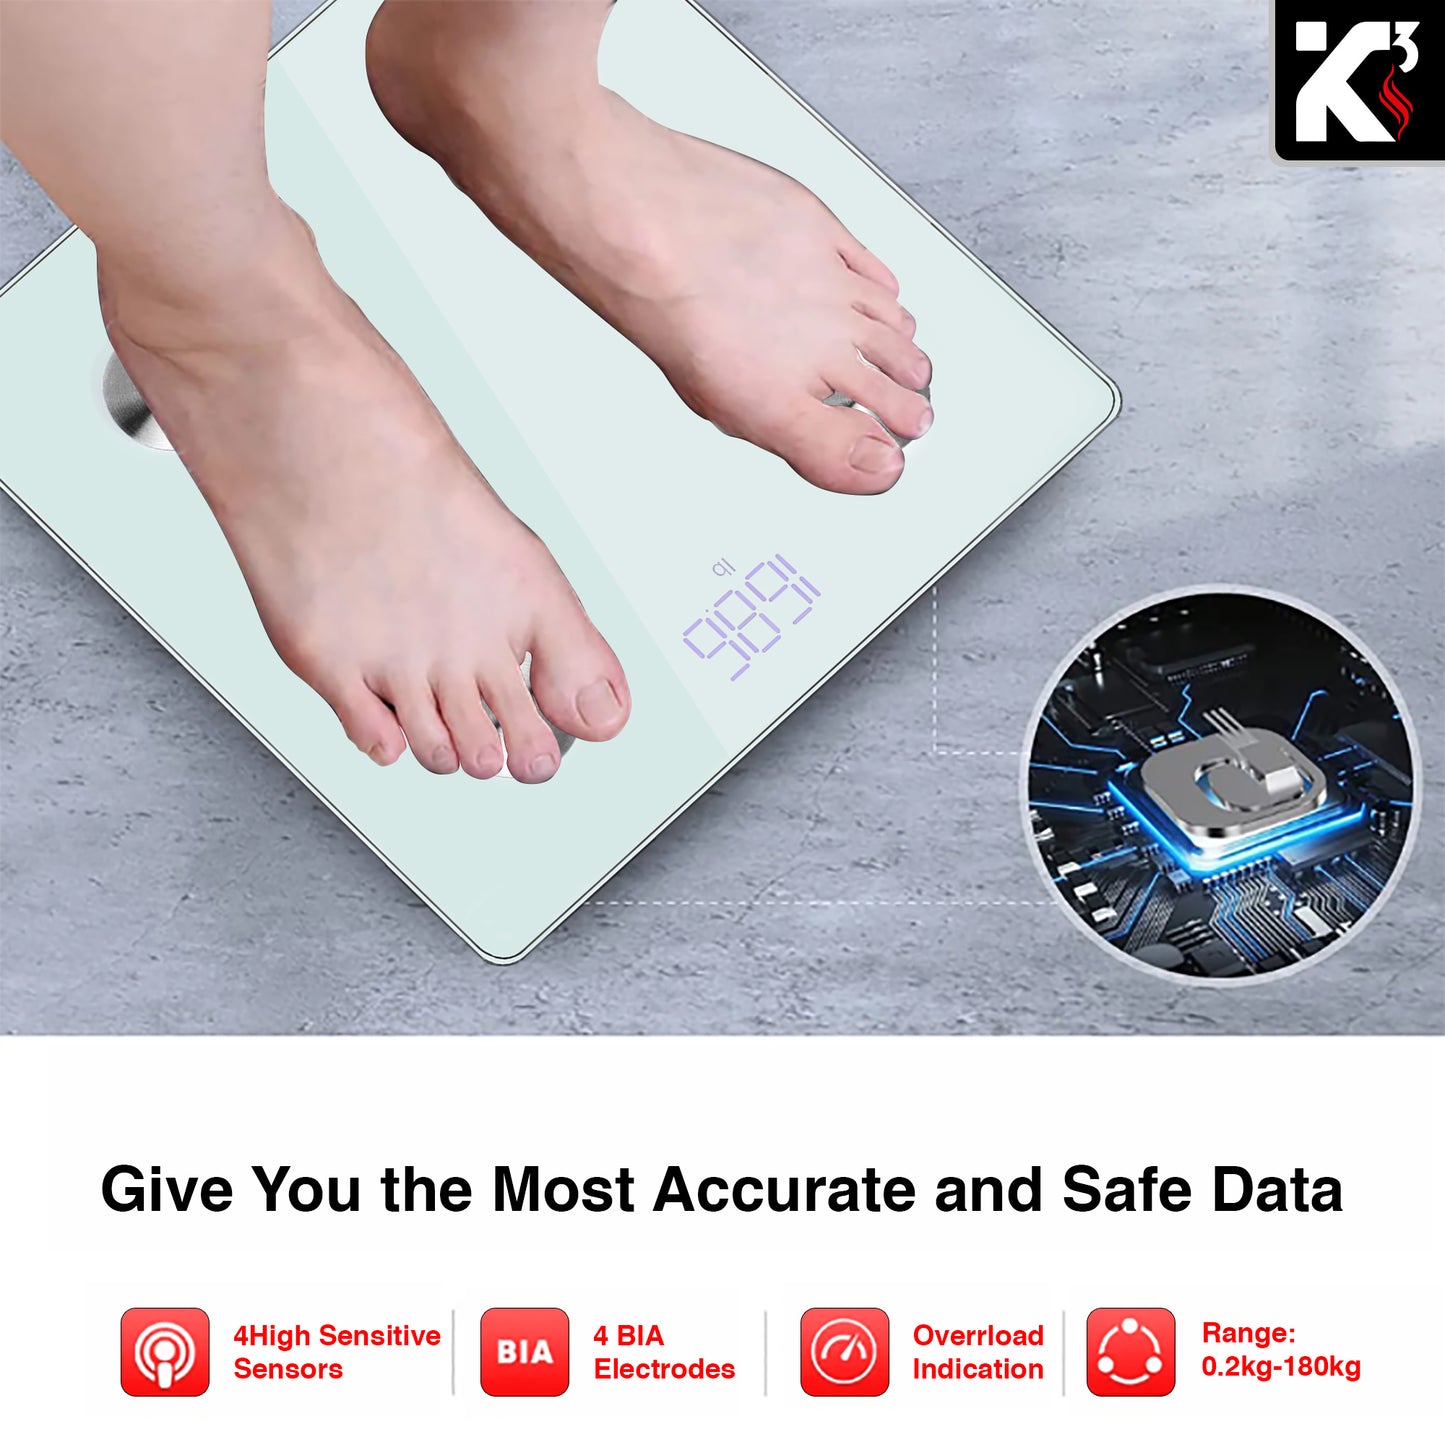 Kcubeinc 2 Pieces Smart Digital Bathroom Weighing Scale with Body Fat and Water Weight for People, Bluetooth BMI Electronic Body Analyzer Machine, 400 lbs. BBS DOT B WH